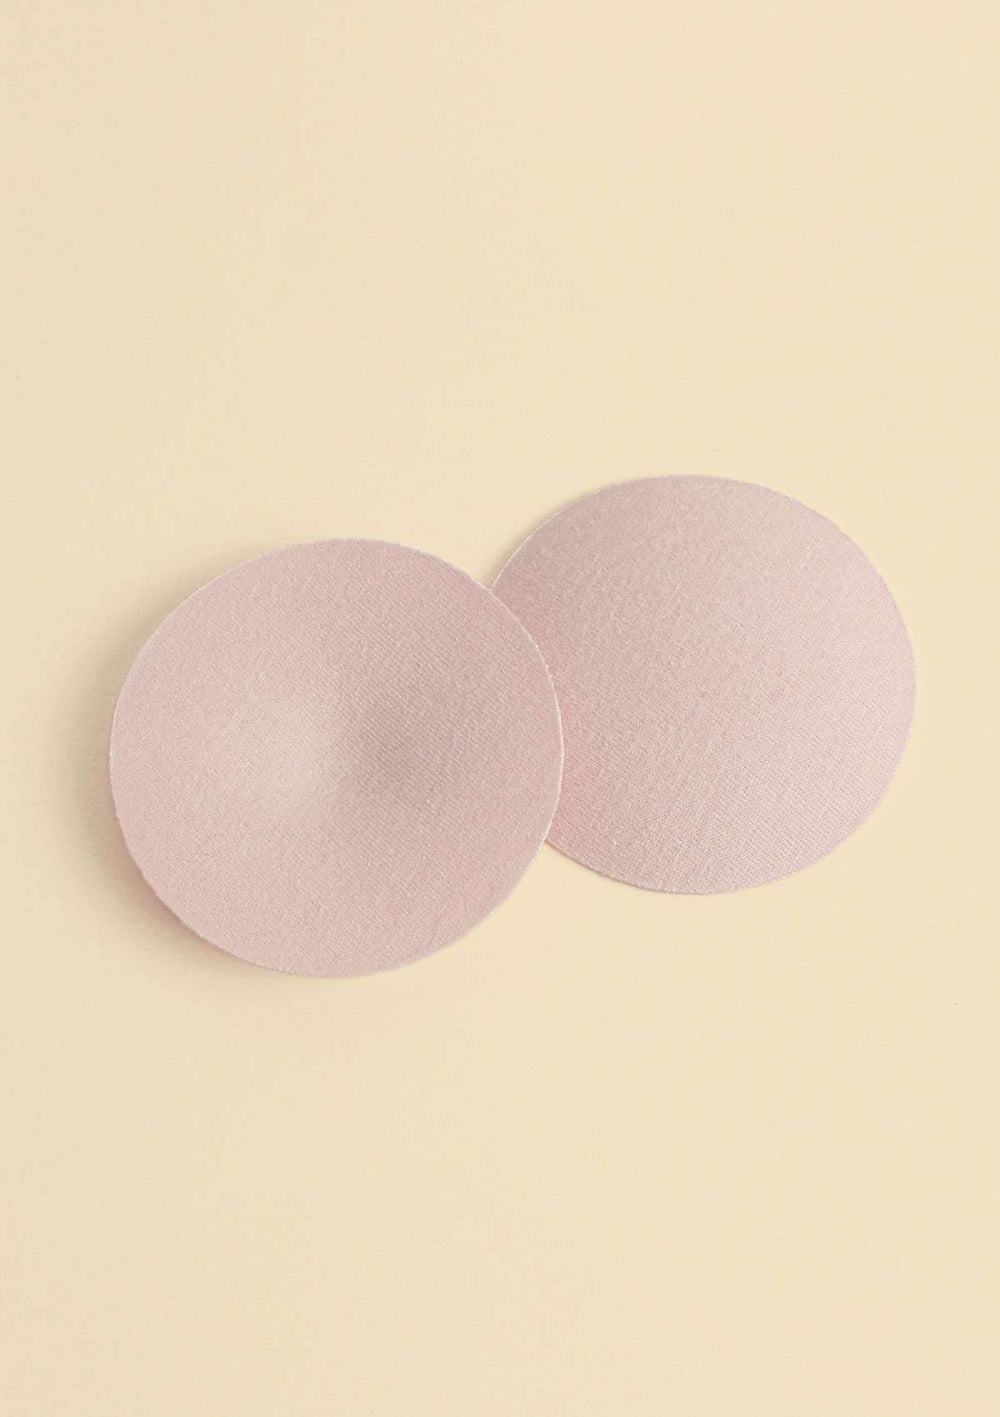 BOLDNYOUNG Cotton Cup Bra Pads (Pack of 3 , One pair) Cotton Cup